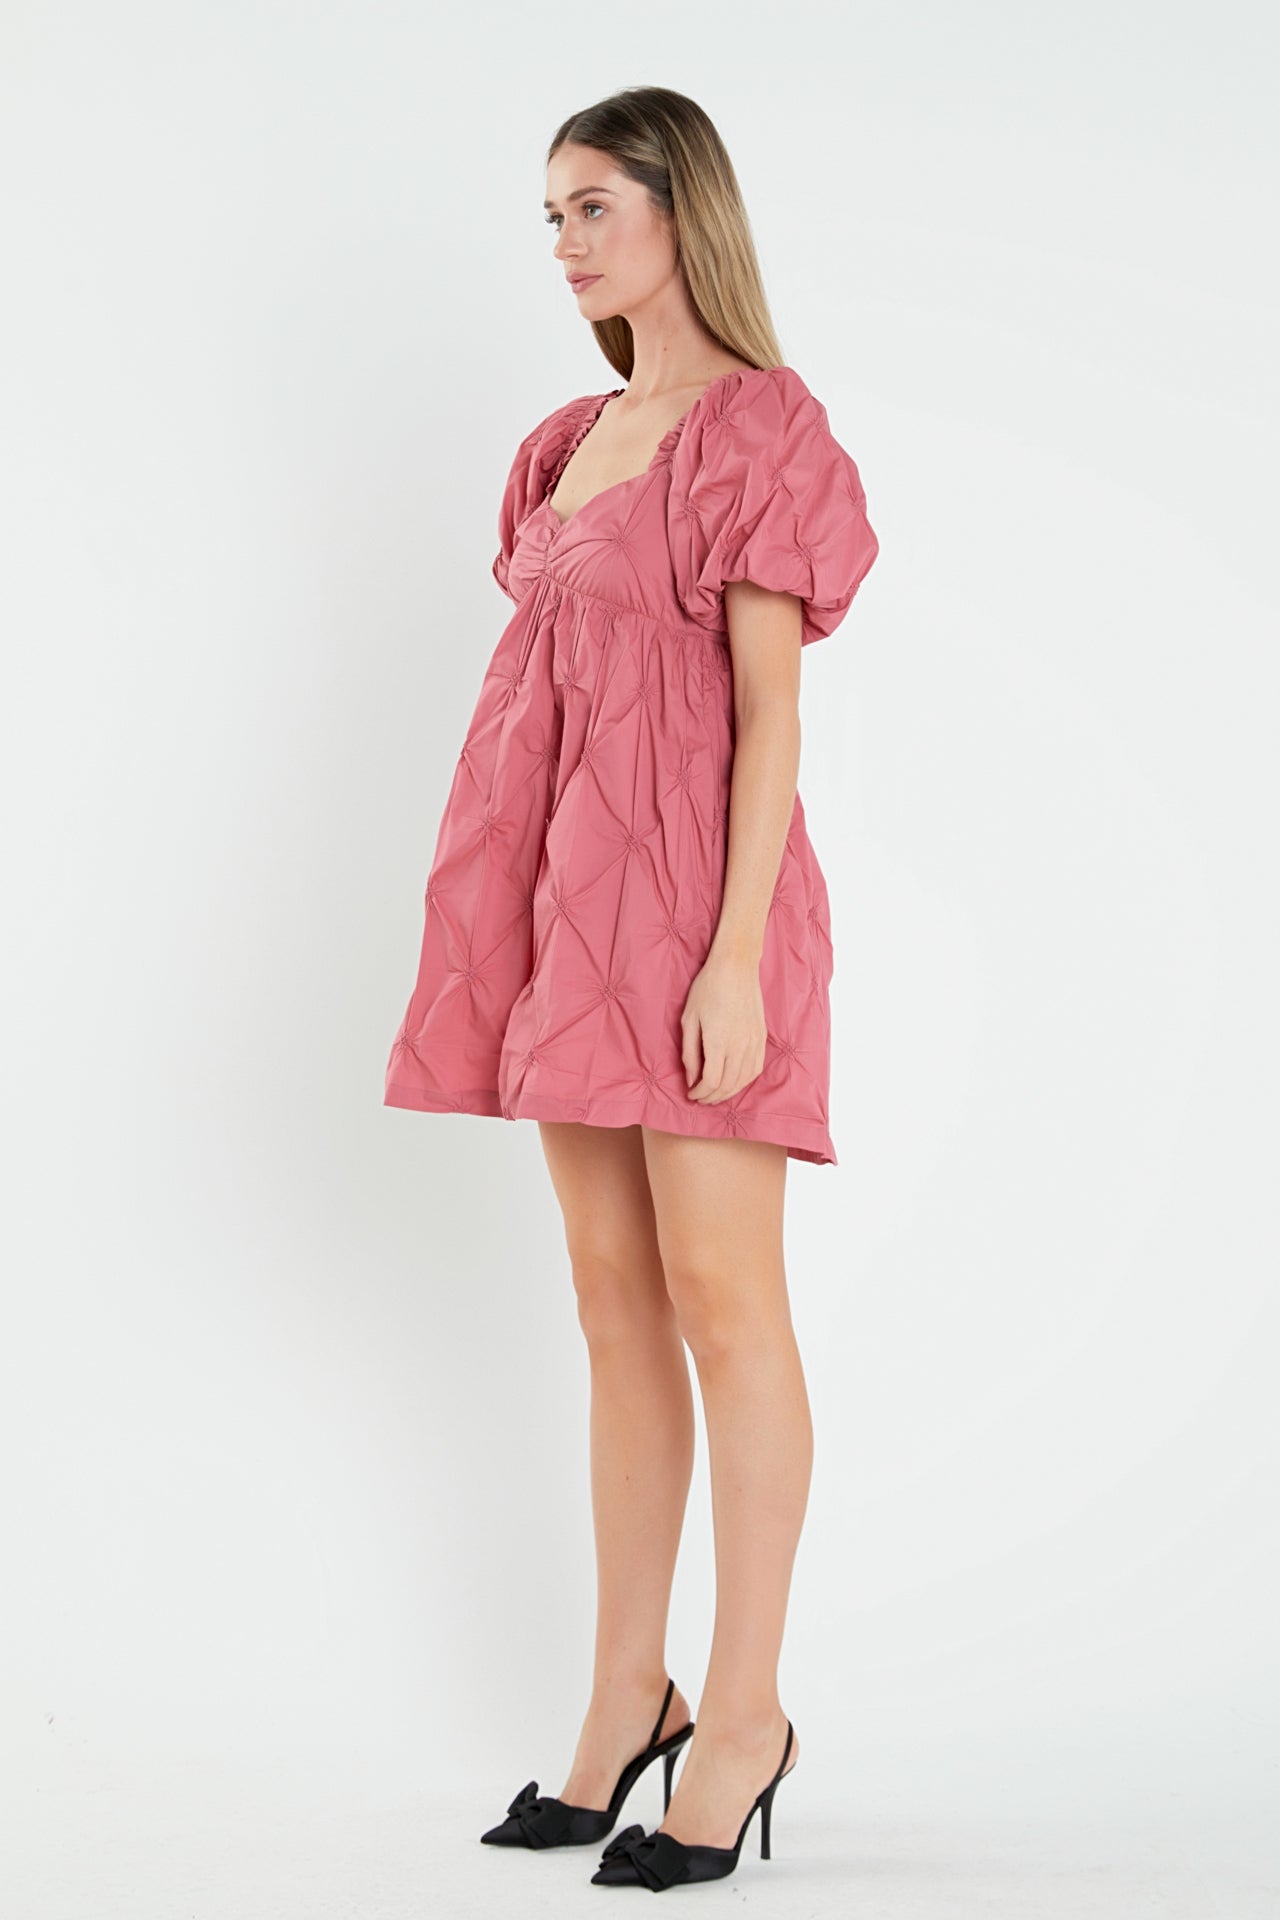 ENGLISH FACTORY - Textured Babydoll Mini Dress - DRESSES available at Objectrare